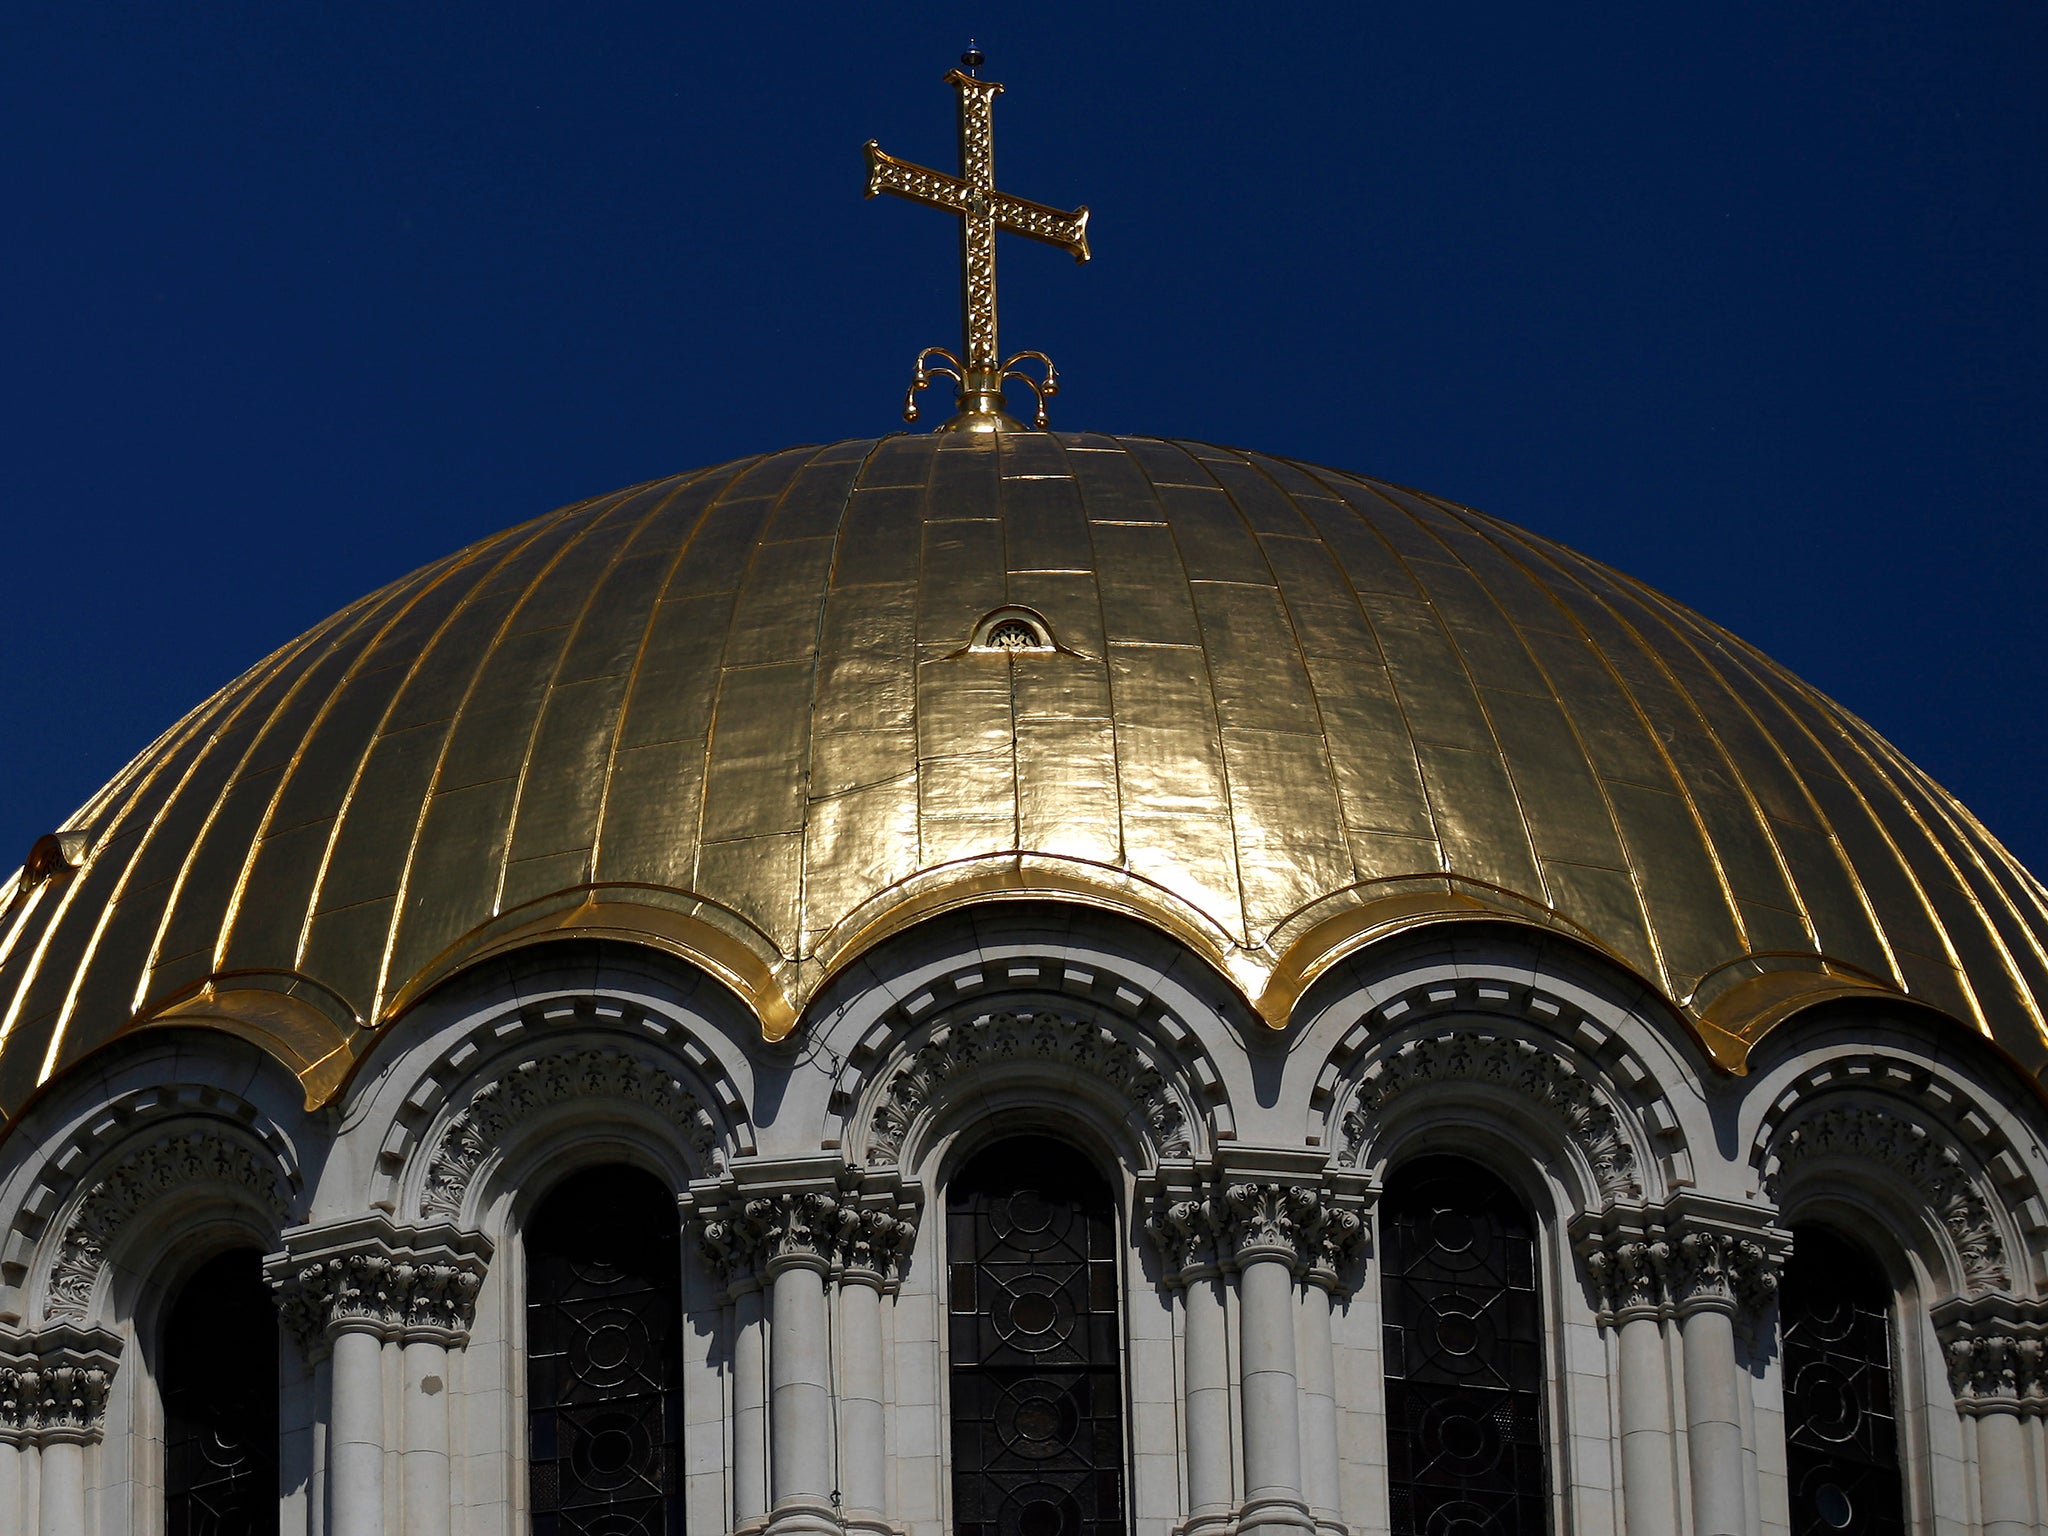 One of the golden domes of Alexander Nevski cathedral in central Sofia, Bulgaria